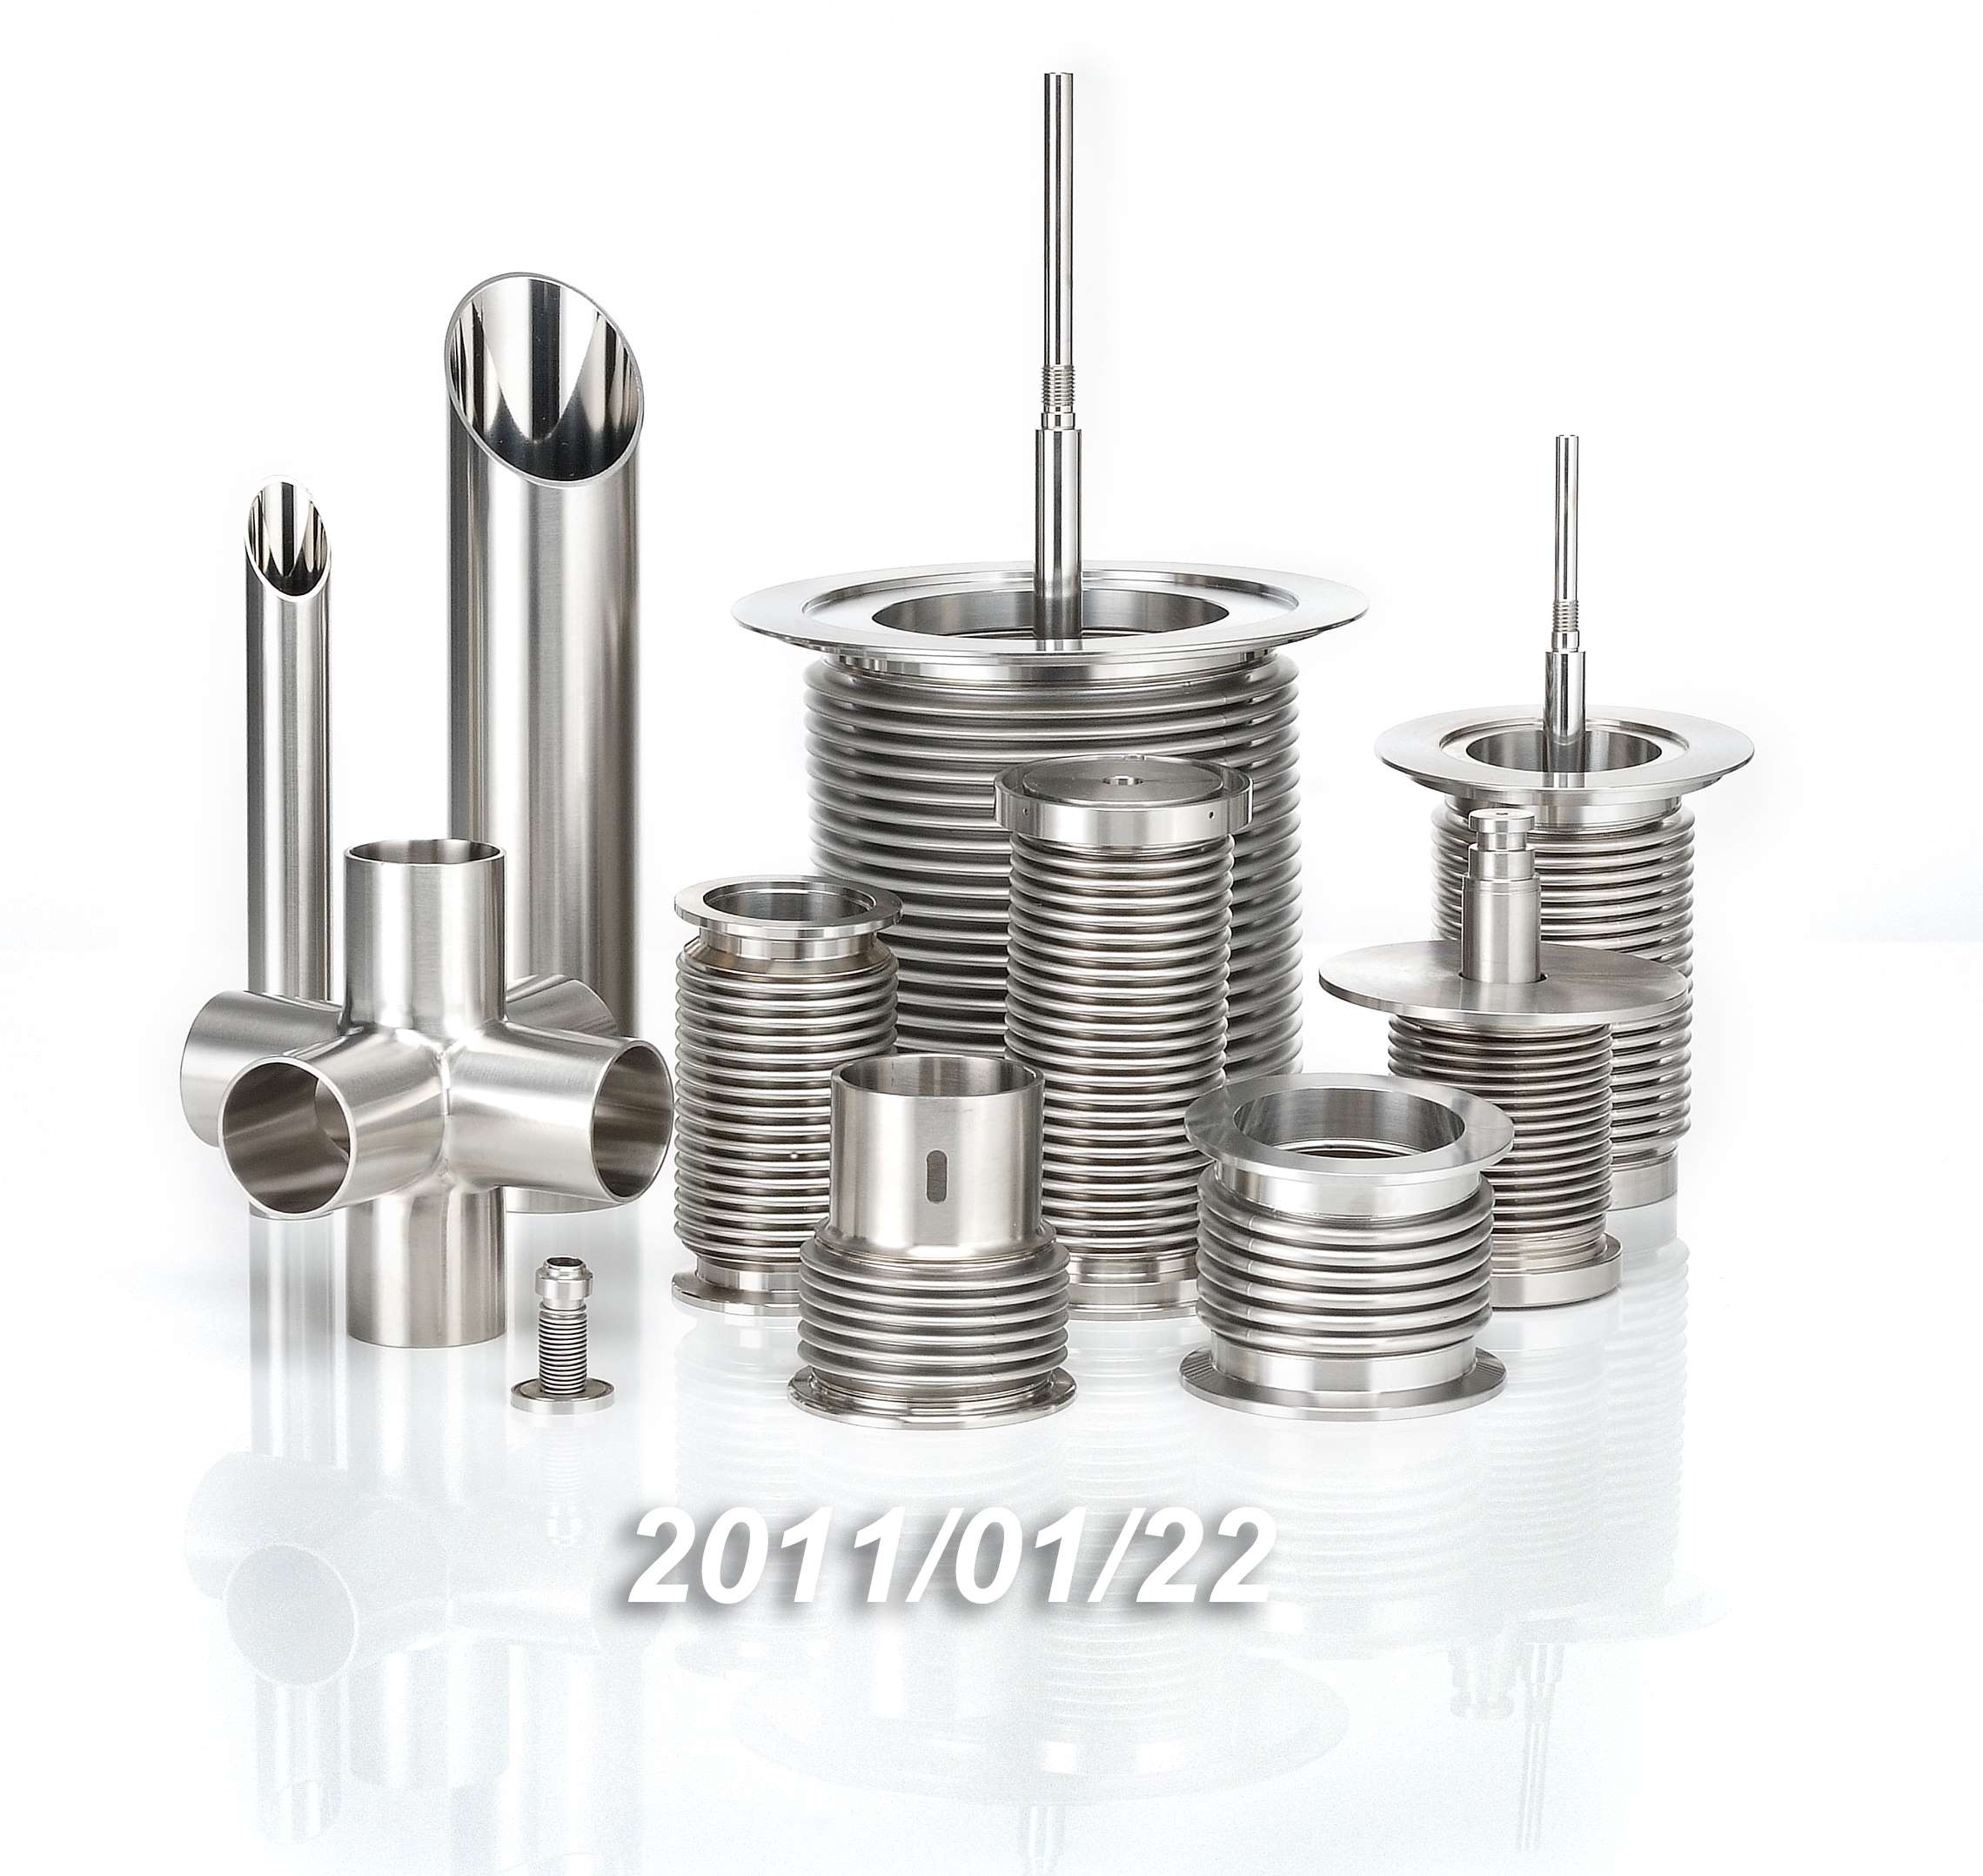 Qualified Disc Coupling Manufacturer and Supplier